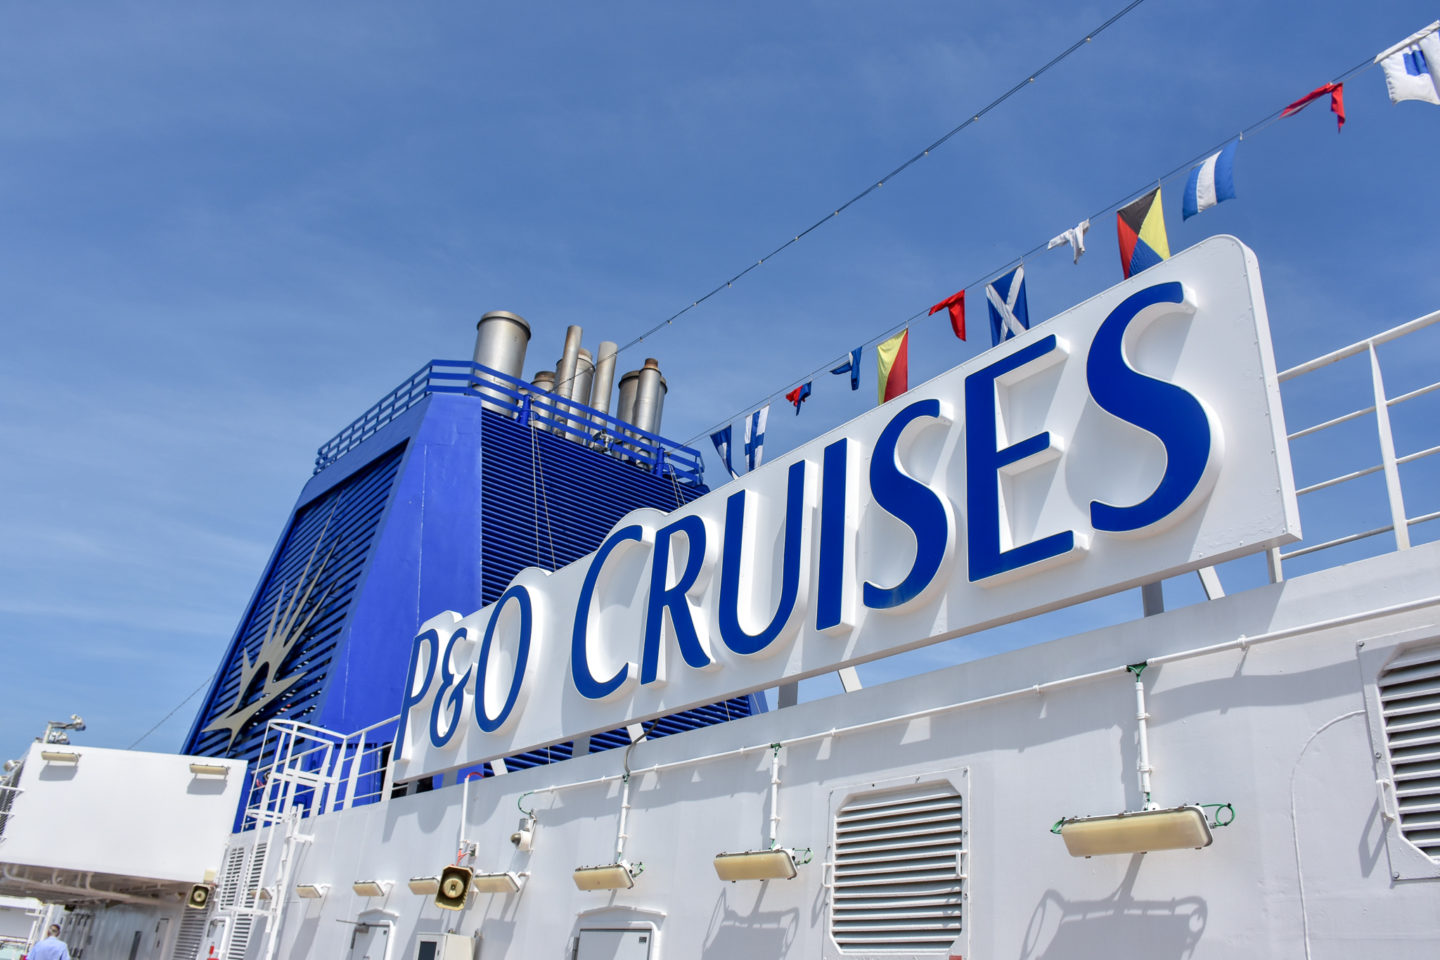 New to Cruising? 5 Reasons to Choose P&O for Your First Cruise